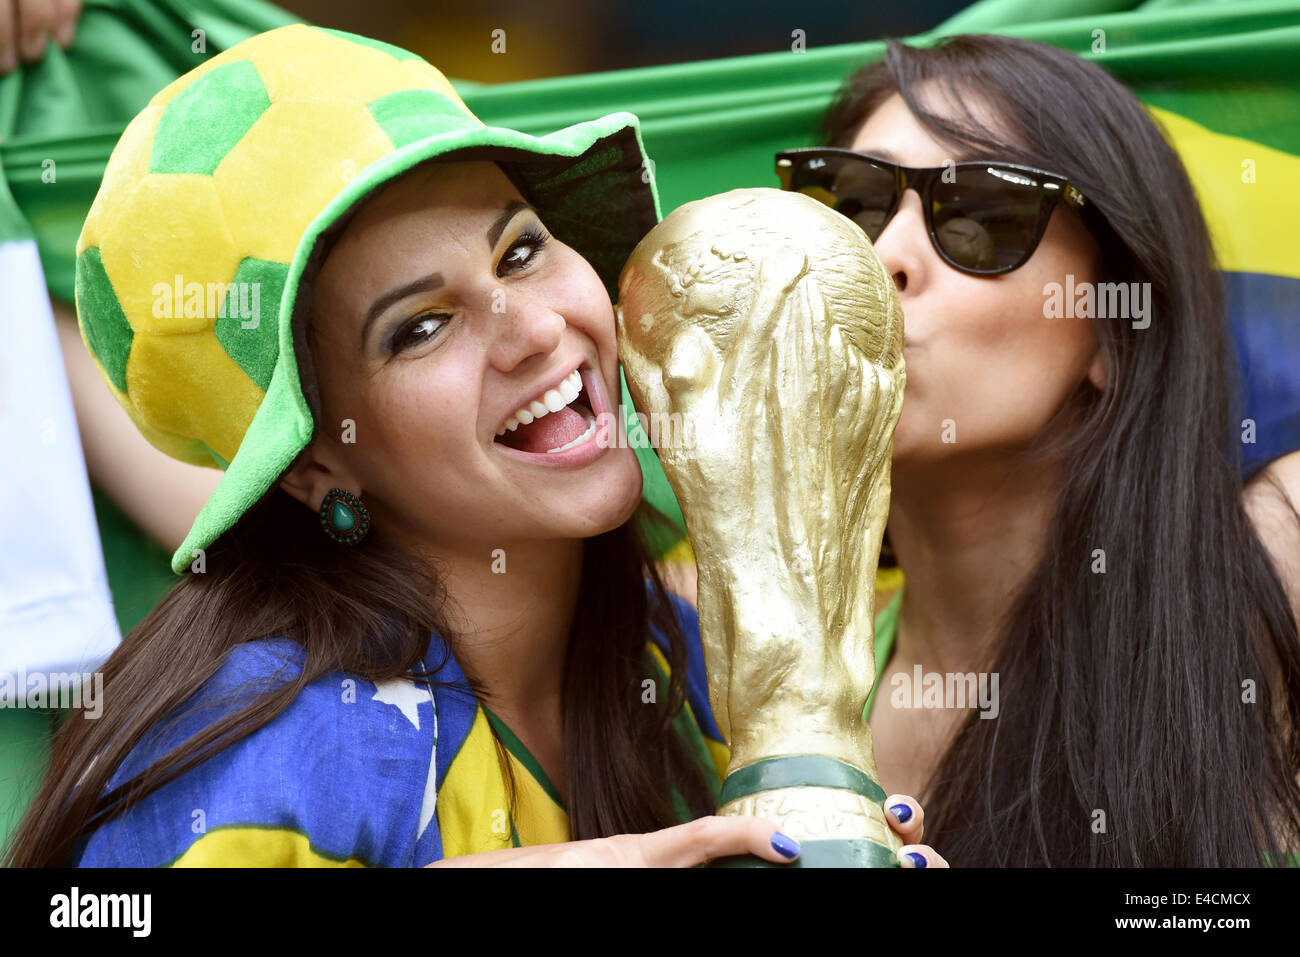 Belo Horizonte, Brazil. 08th July, 2014. Two female supporters of Brazil hold a mock-up world cup trophy prior to the FIFA World Cup 2014 semi-final soccer match between Brazil and Germany at Estadio Mineirao in Belo Horizonte, Brazil, 08 July 2014. Photo: Marcus Brandt/dpa/Alamy Live News Stock Photo